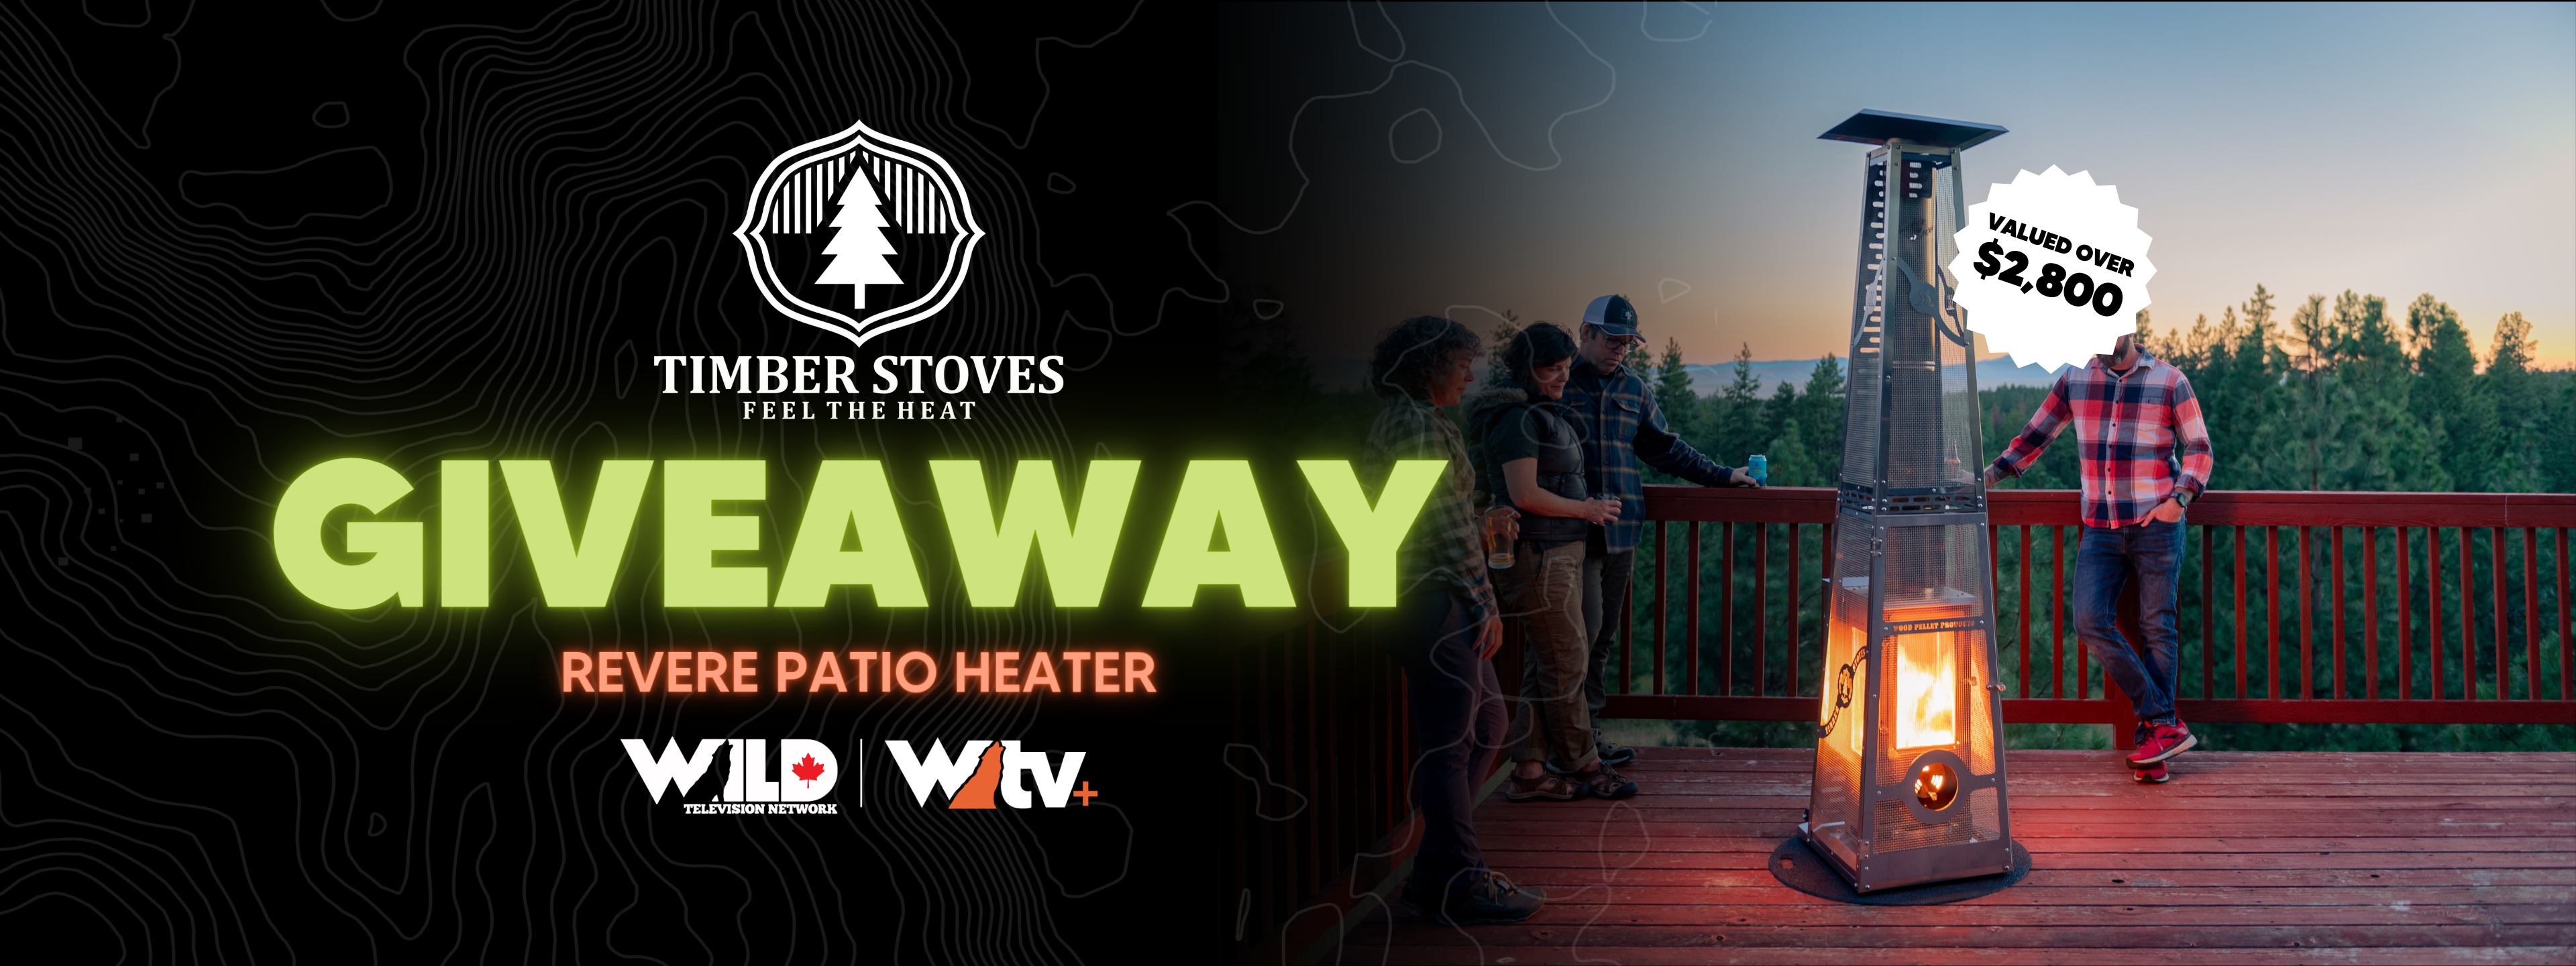 Timber Stoves Giveaway